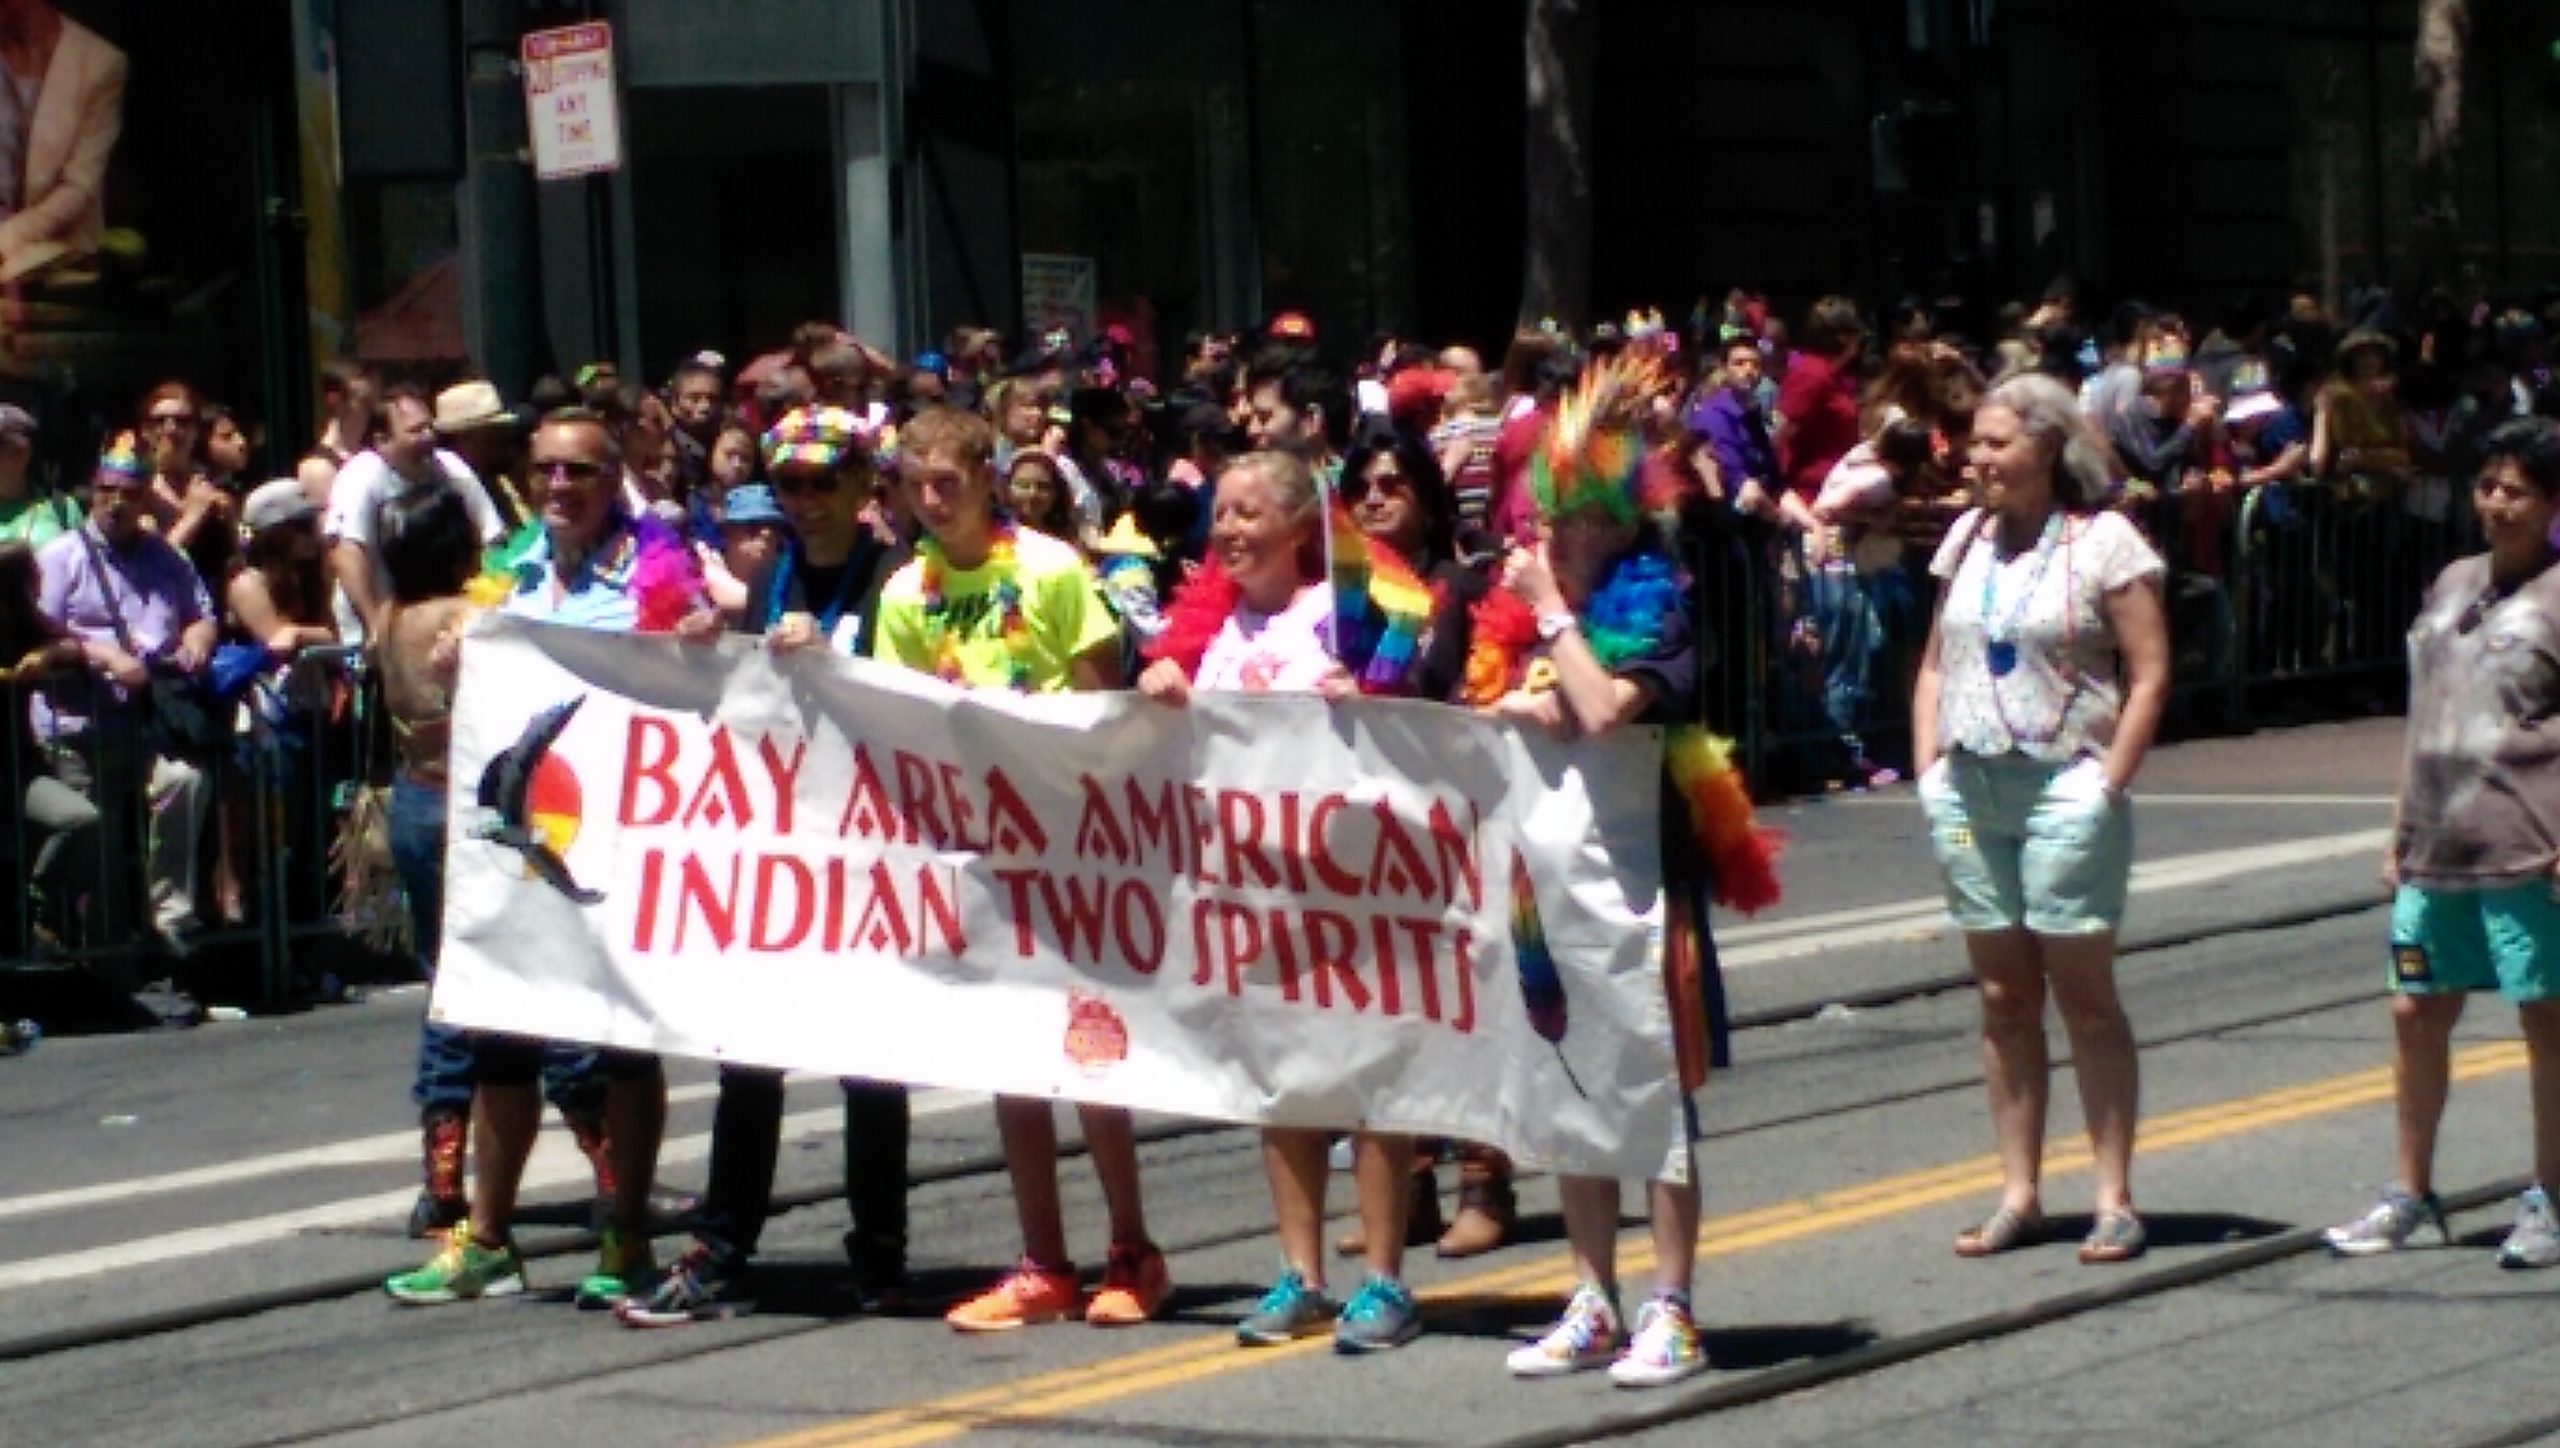 A line of people hold a sign that says "Bay Area American Indian Two Spirits."